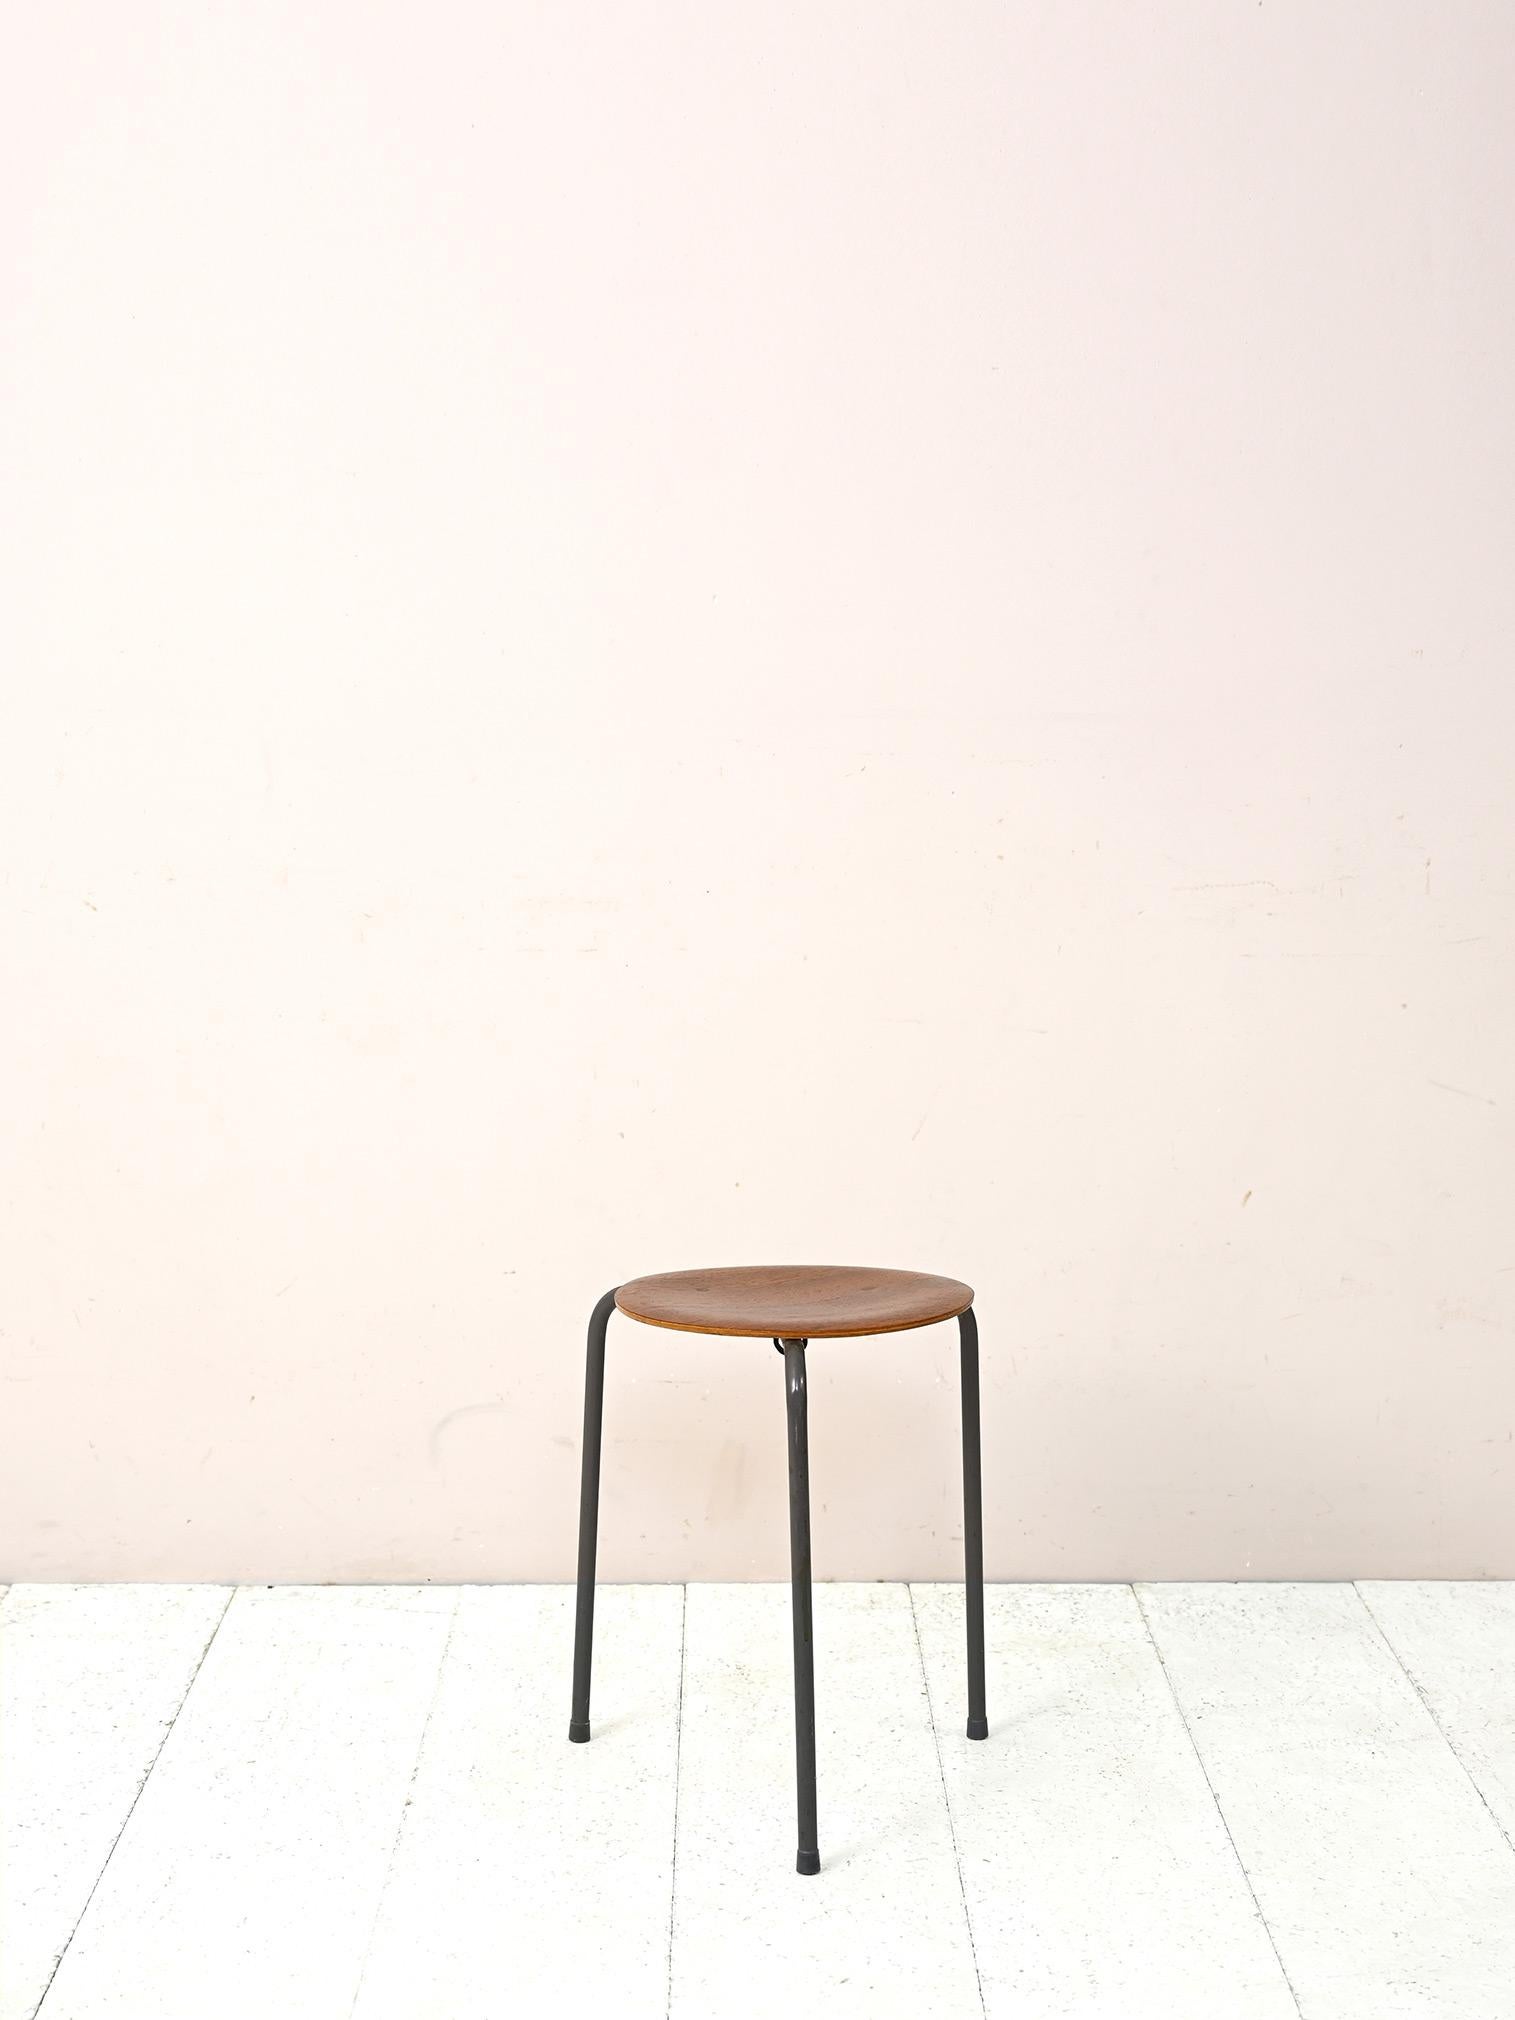 Scandinavian 1960s stool.
Consists of a tubular metal support frame and an upholstered seat made of teak wood veneer.A retro-looking piece of furniture to be used either as a seat or as a small table top.
Good condition. May show some signs of